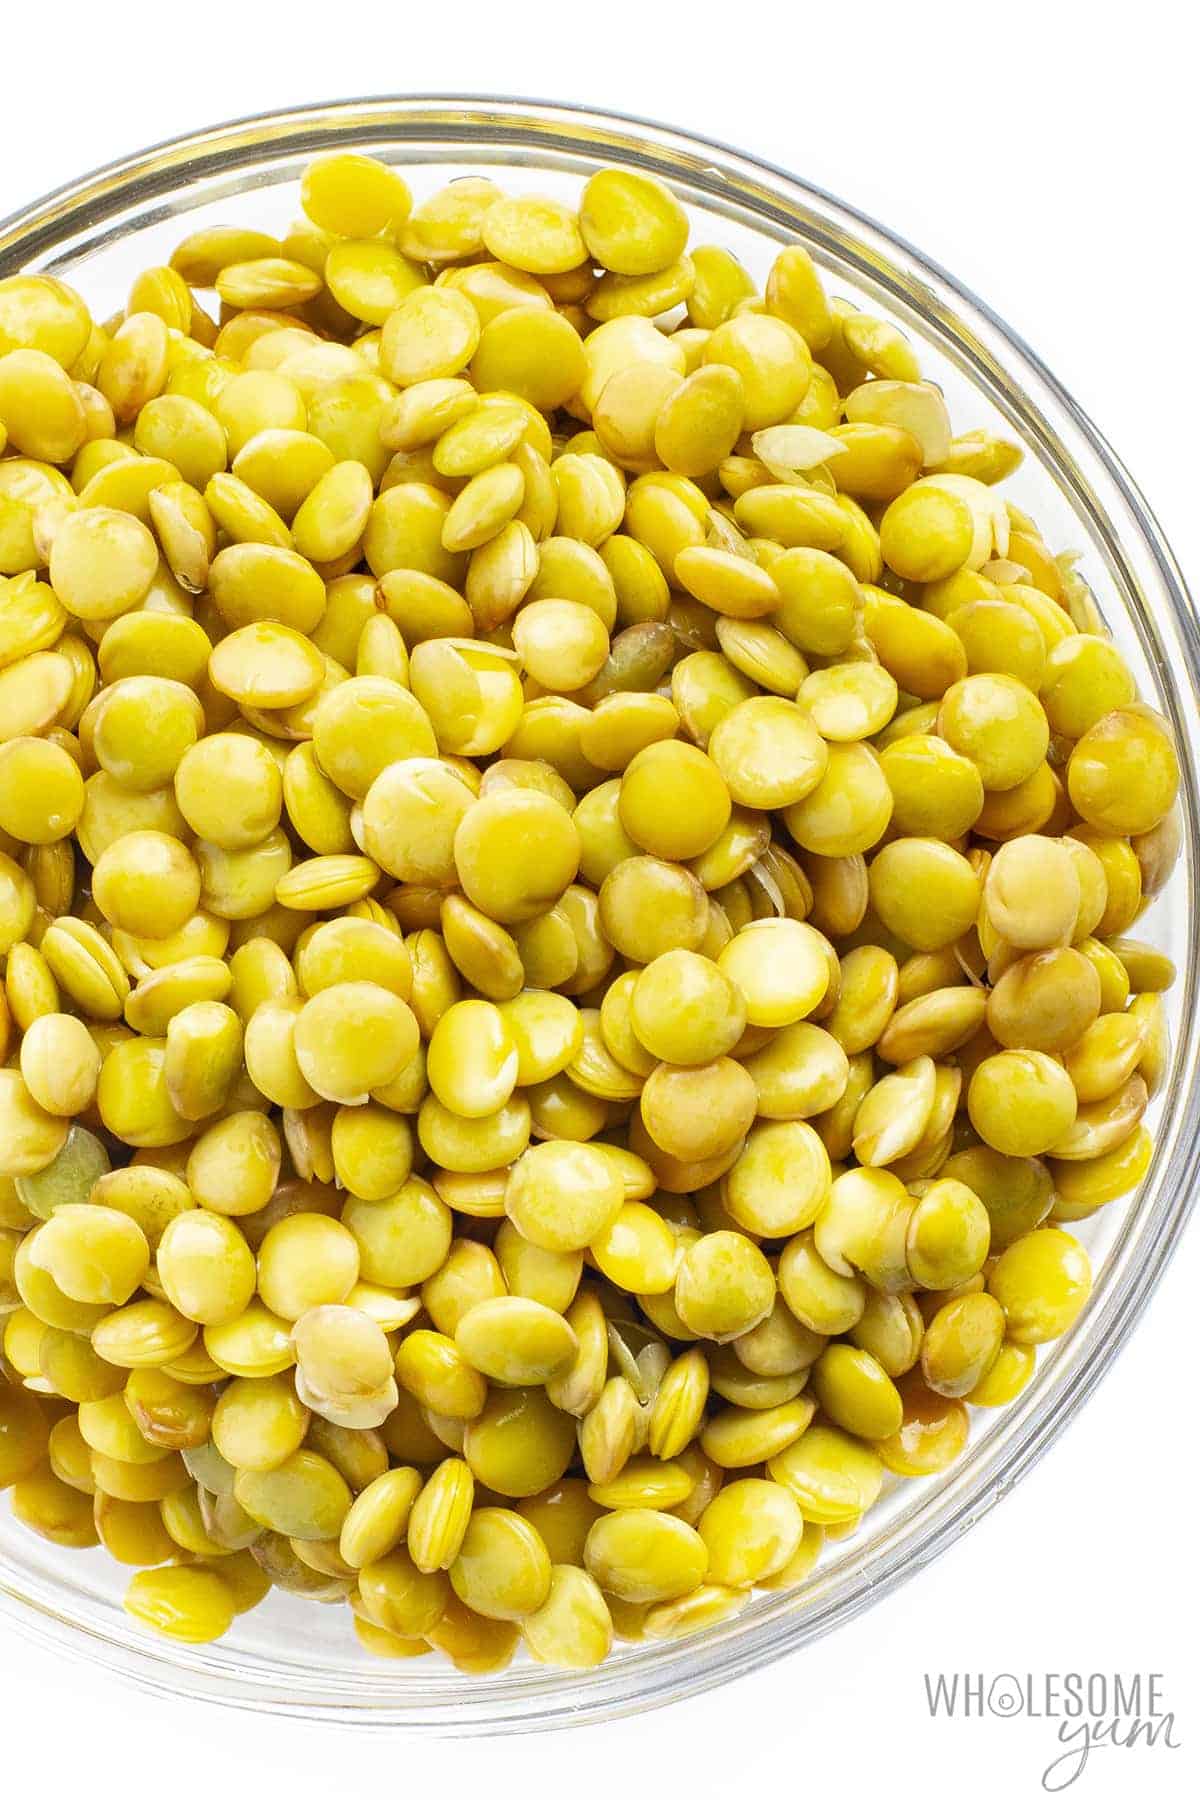 How high are carbs in lentils? These raw green lentils have too many carbs to be keto friendly.